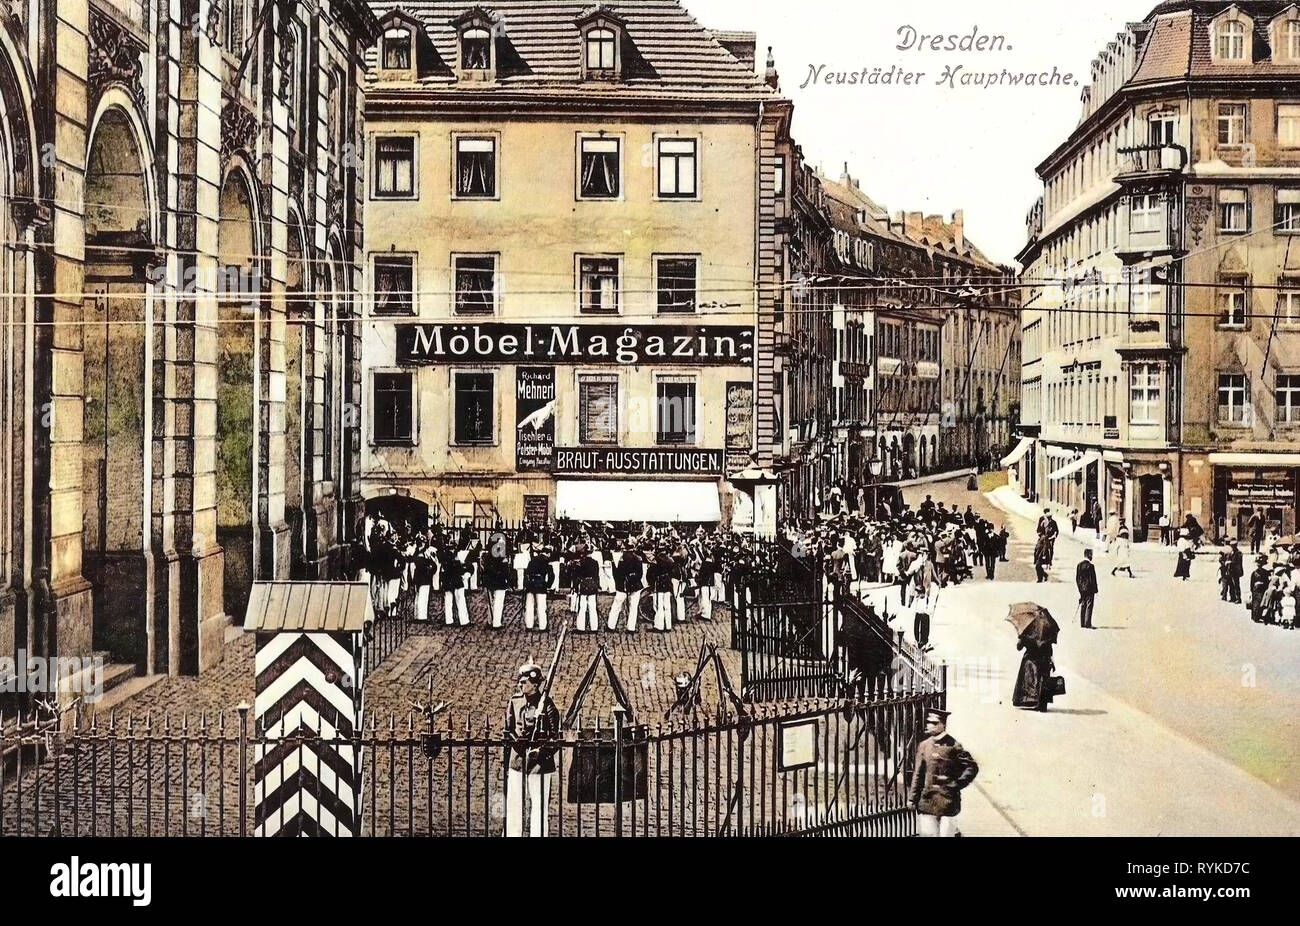 Military facilities of Germany, Blockhaus (Dresden), Army of Saxony, Orchestras from Germany, Sentry boxes in Germany (historical), Fences in Dresden, Neustädter Markt, 1915, Dresden, Neustädter Hauptwache Stock Photo